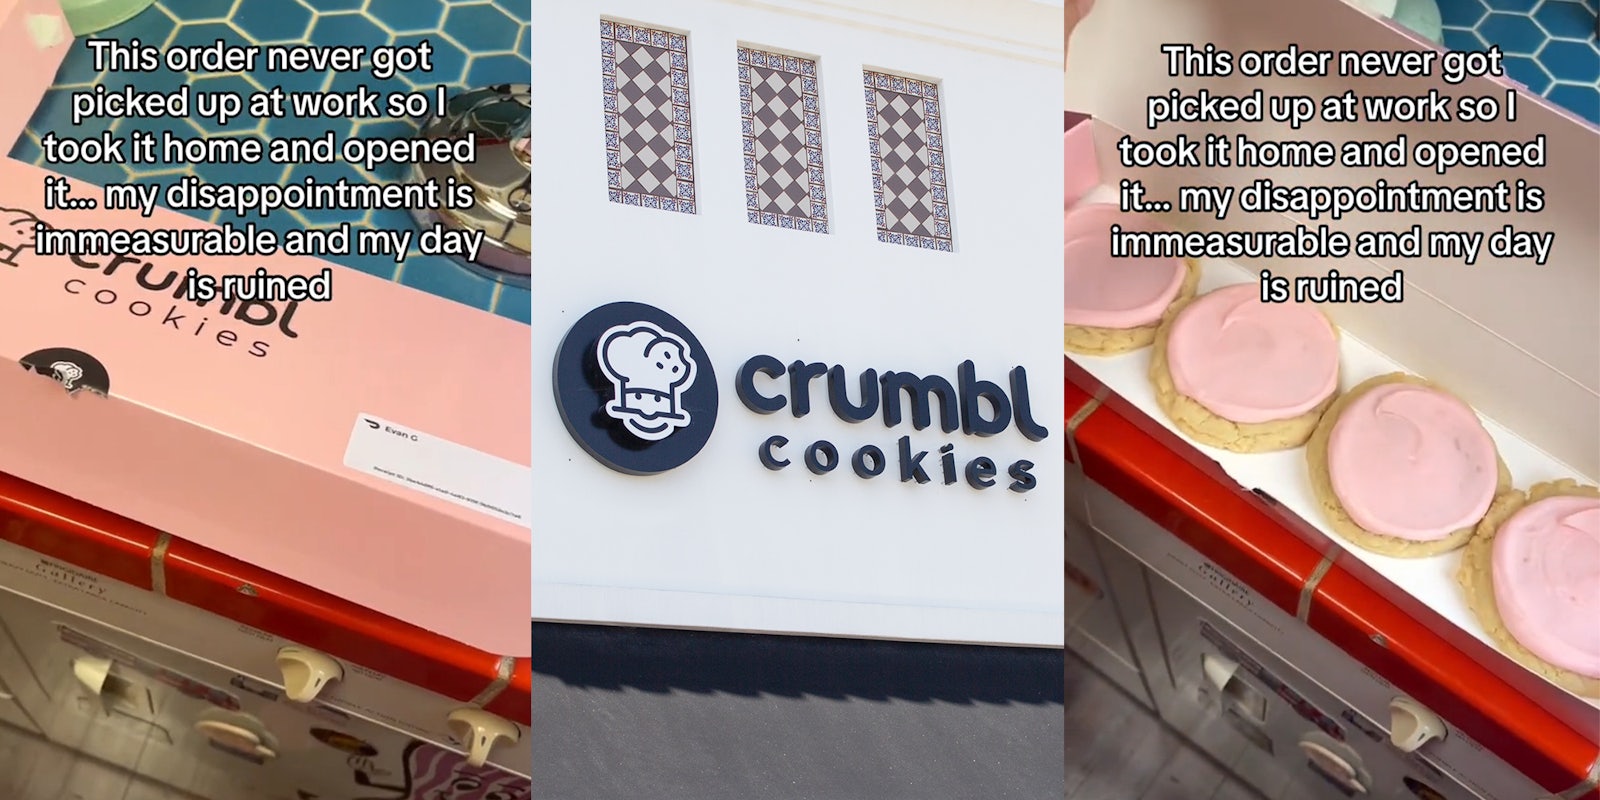 Crumbl cookie worker takes home order that was never picked up.